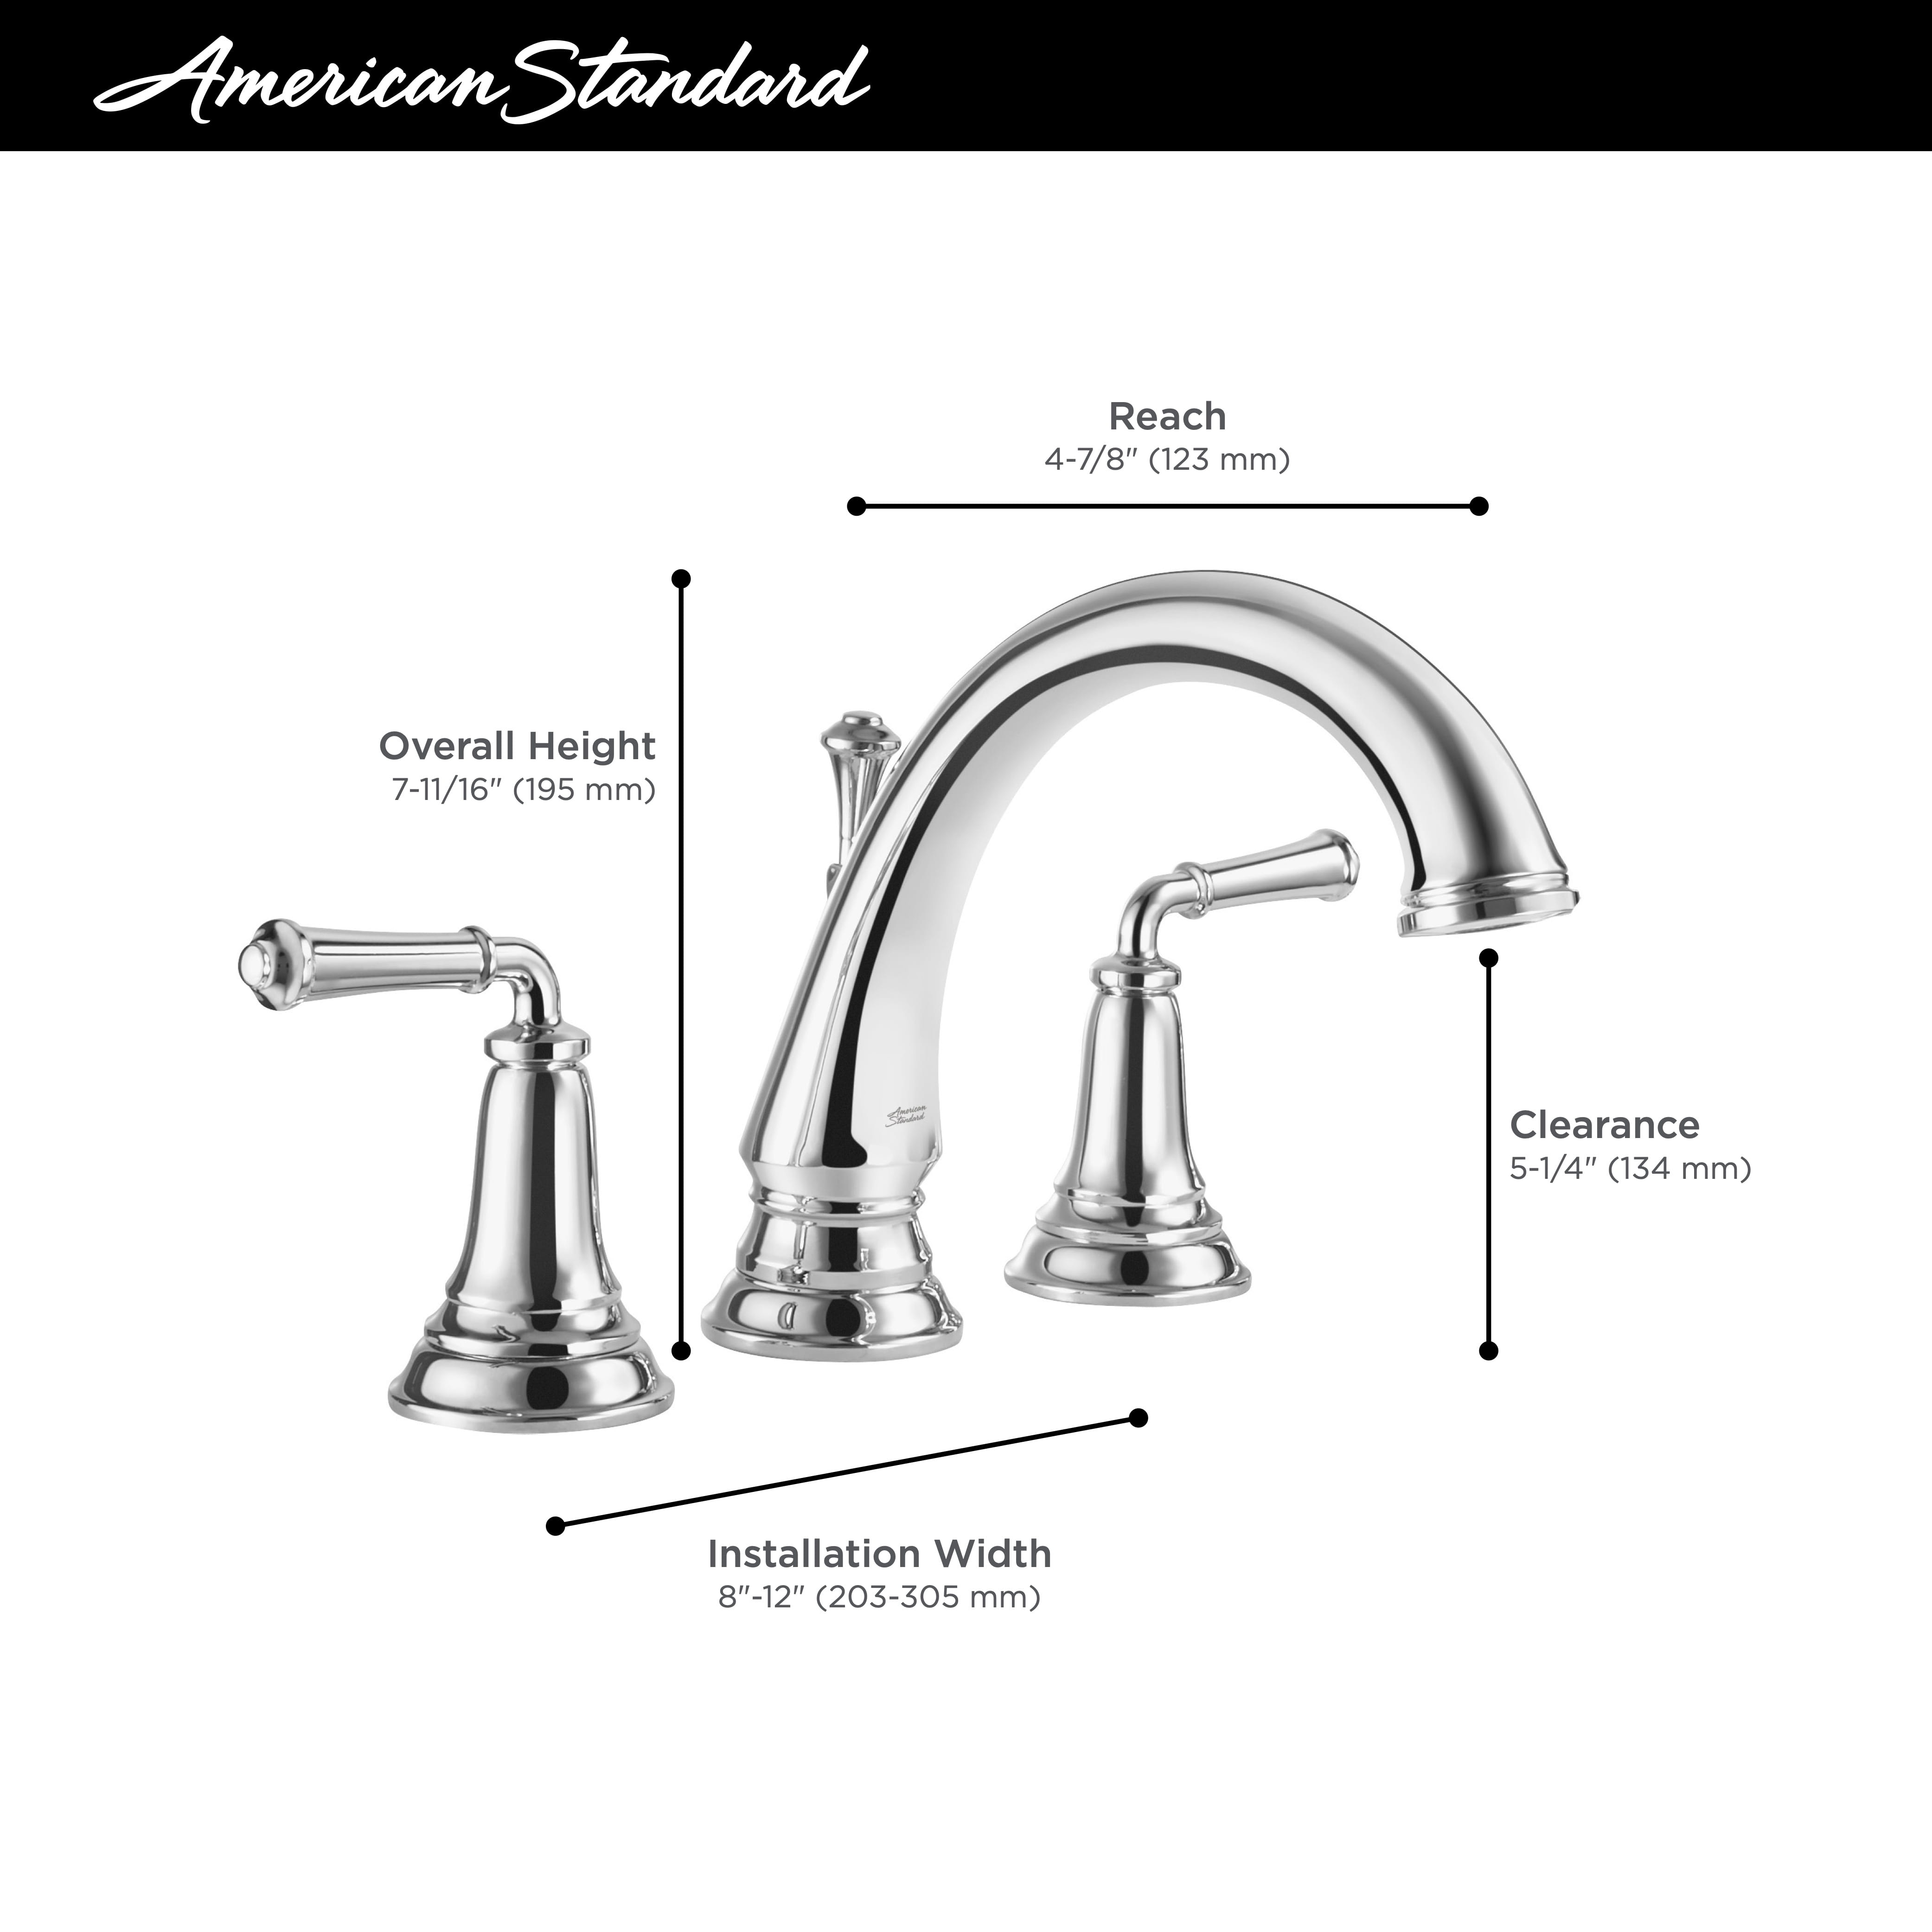 Delancey 8 Inch Widespread 2 Handle Bathroom Faucet 12 gpm 45 L min With Cross Handles LEGACY BRONZE